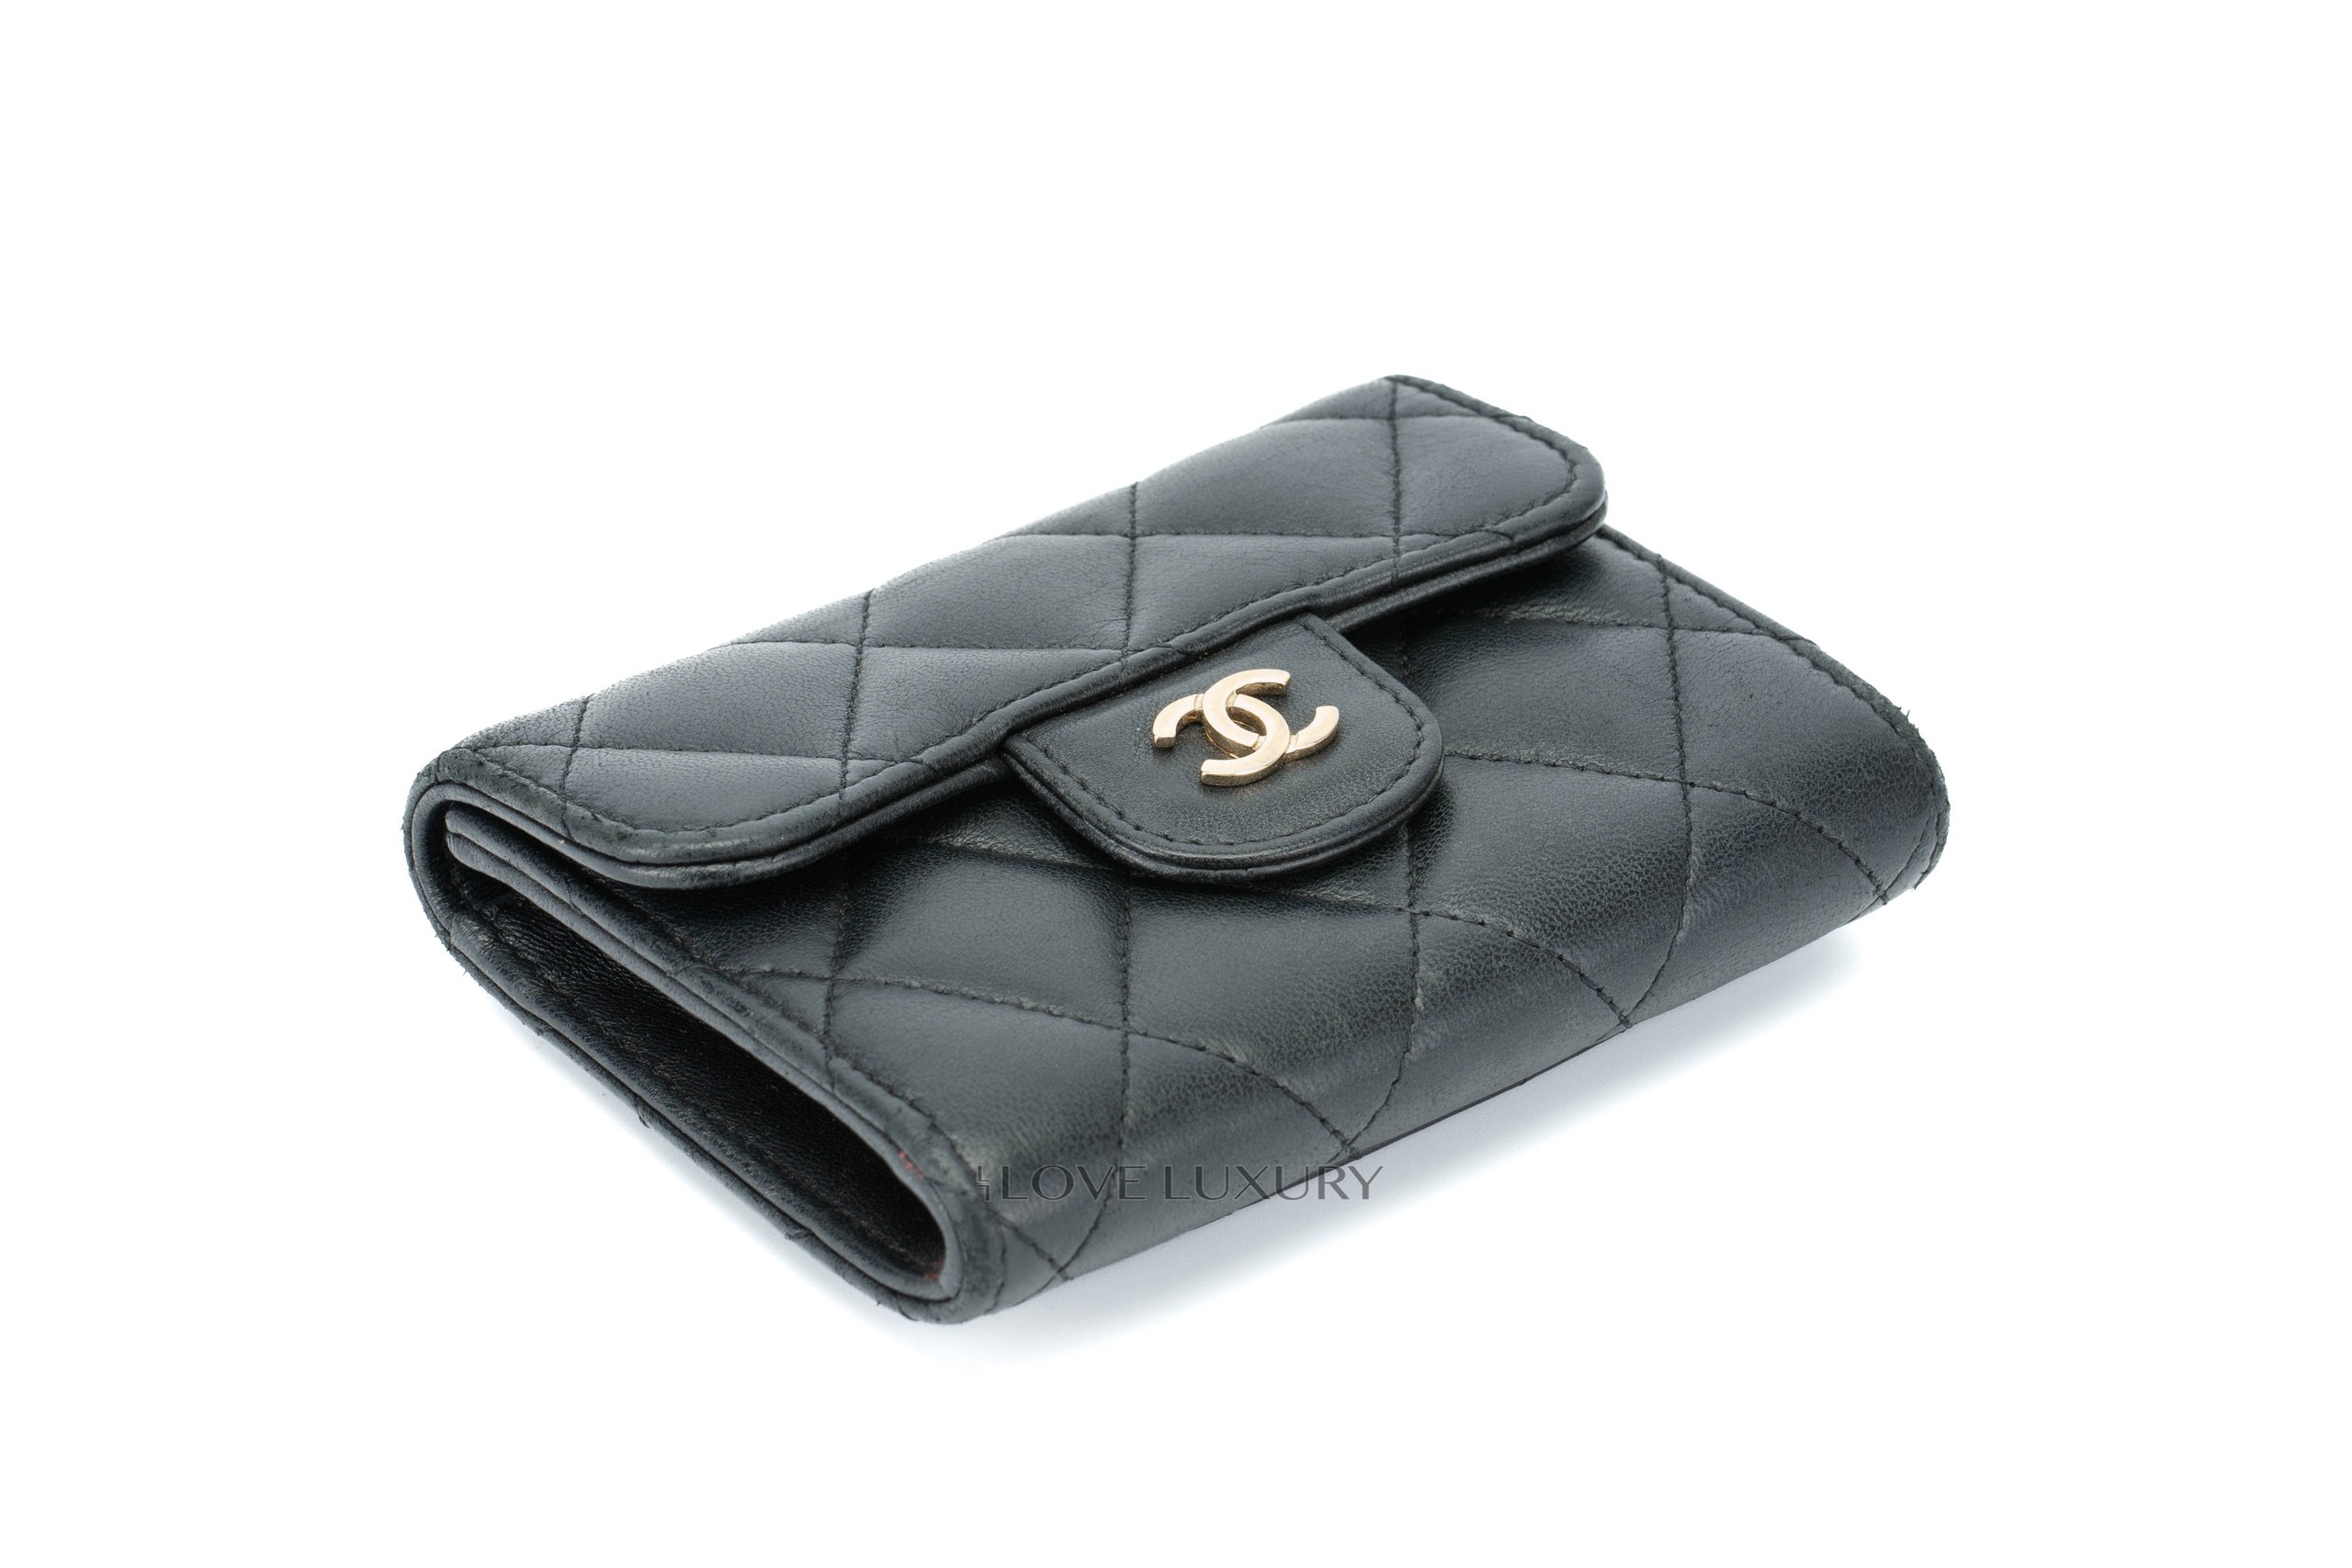 Chanel Classic Flap Card Purse in Black Caviar with Gold Hardware - SOLD